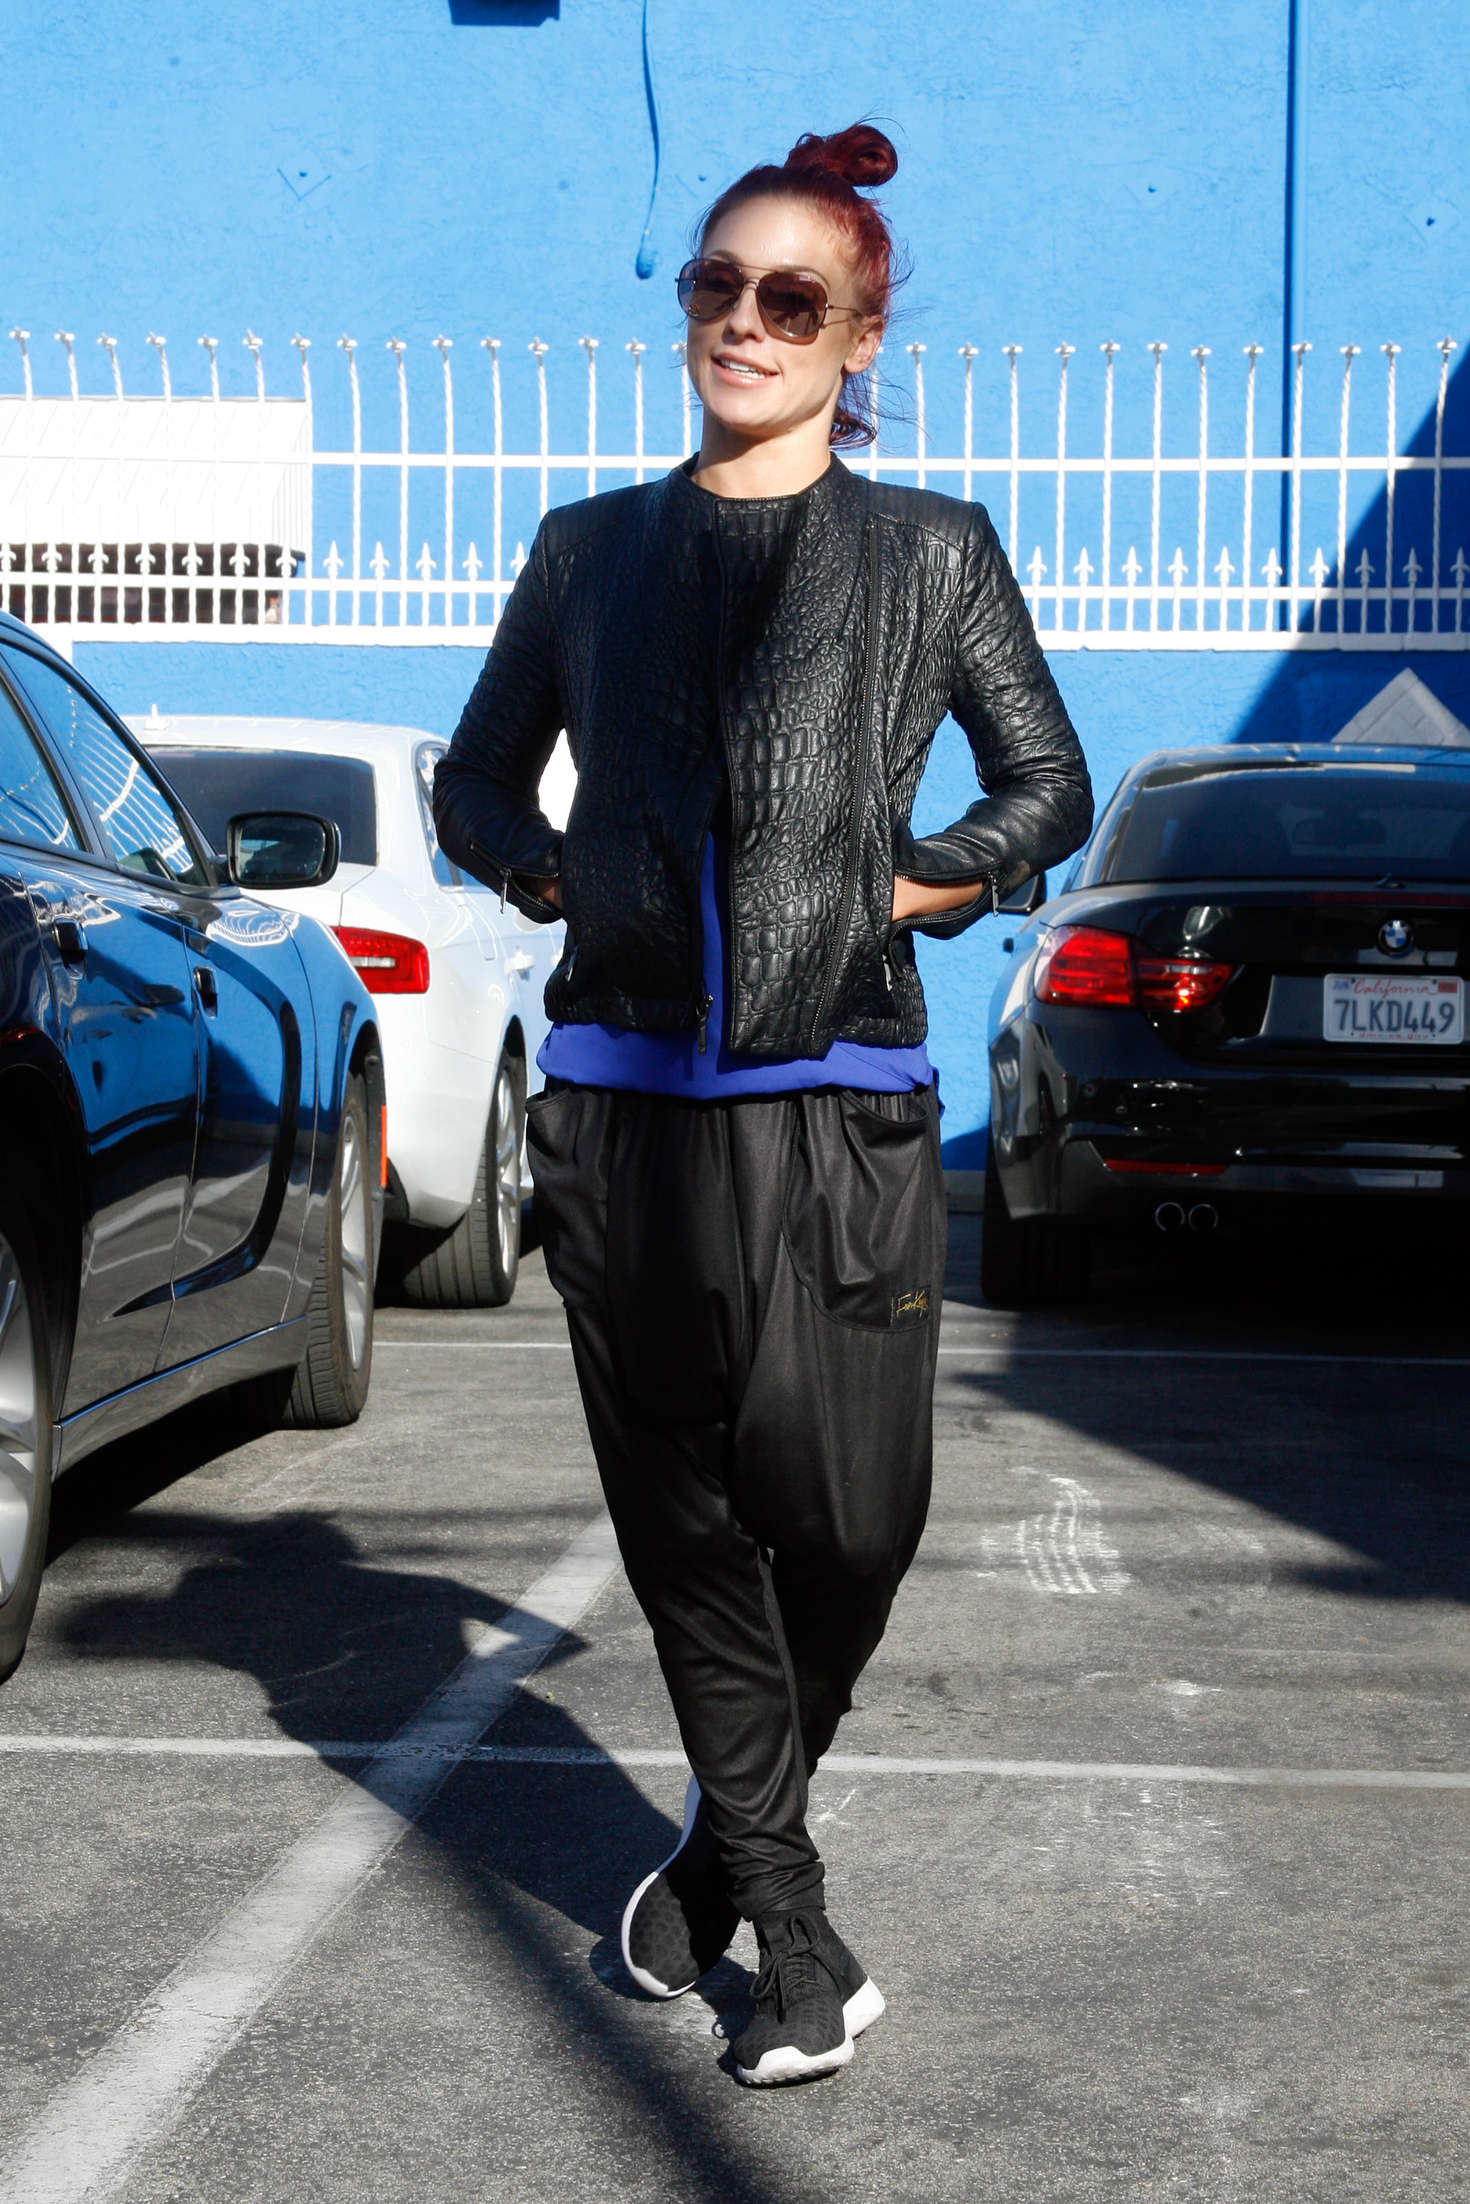 Sharna Burgess at DWTS Practice in Hollywood